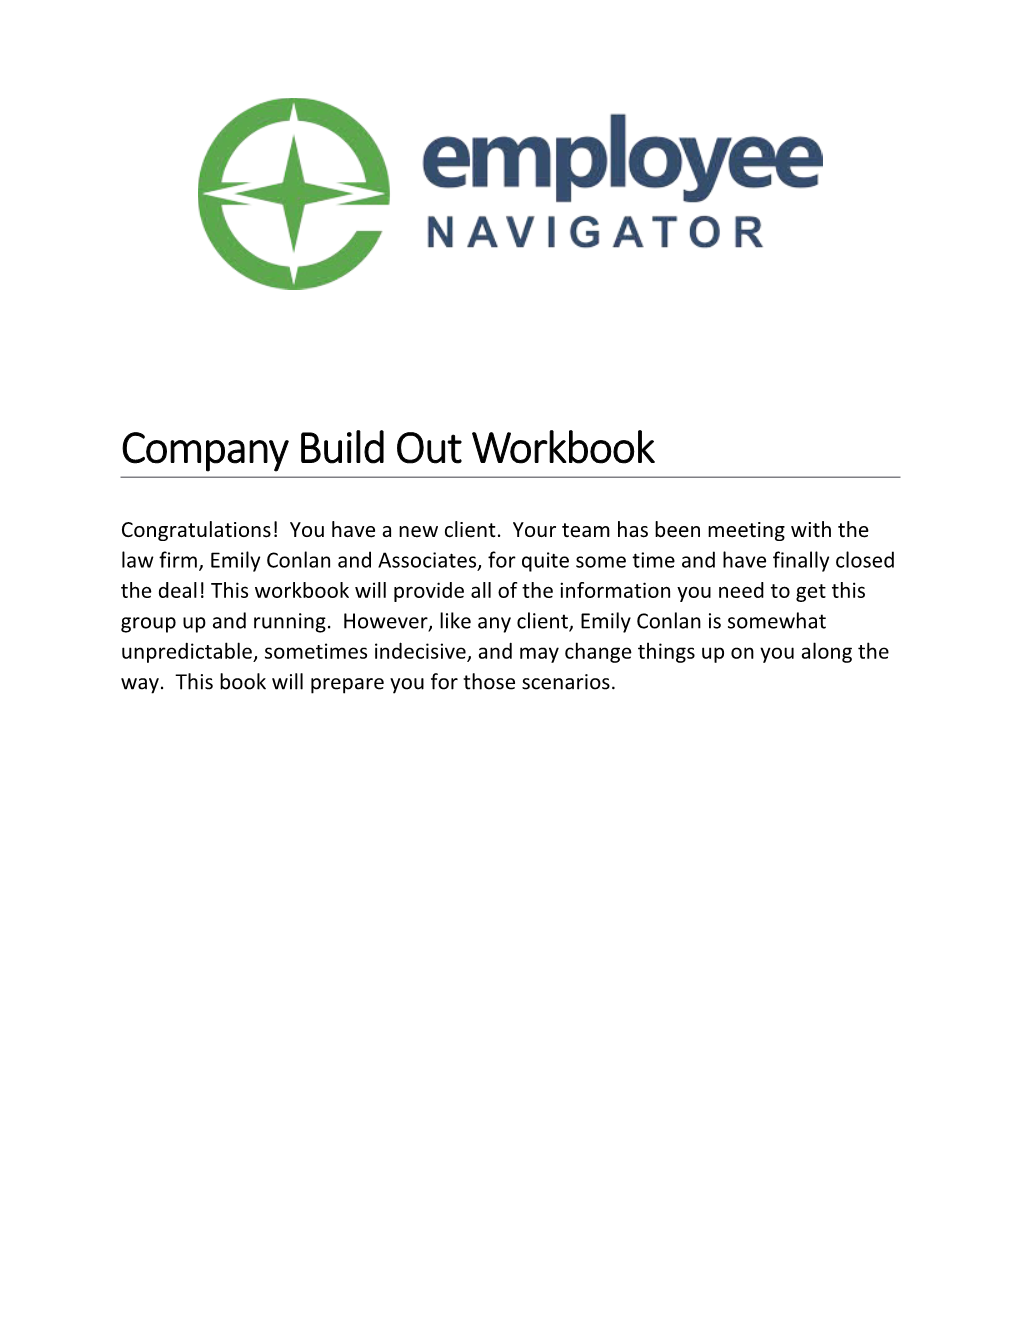 Company Build out Workbook